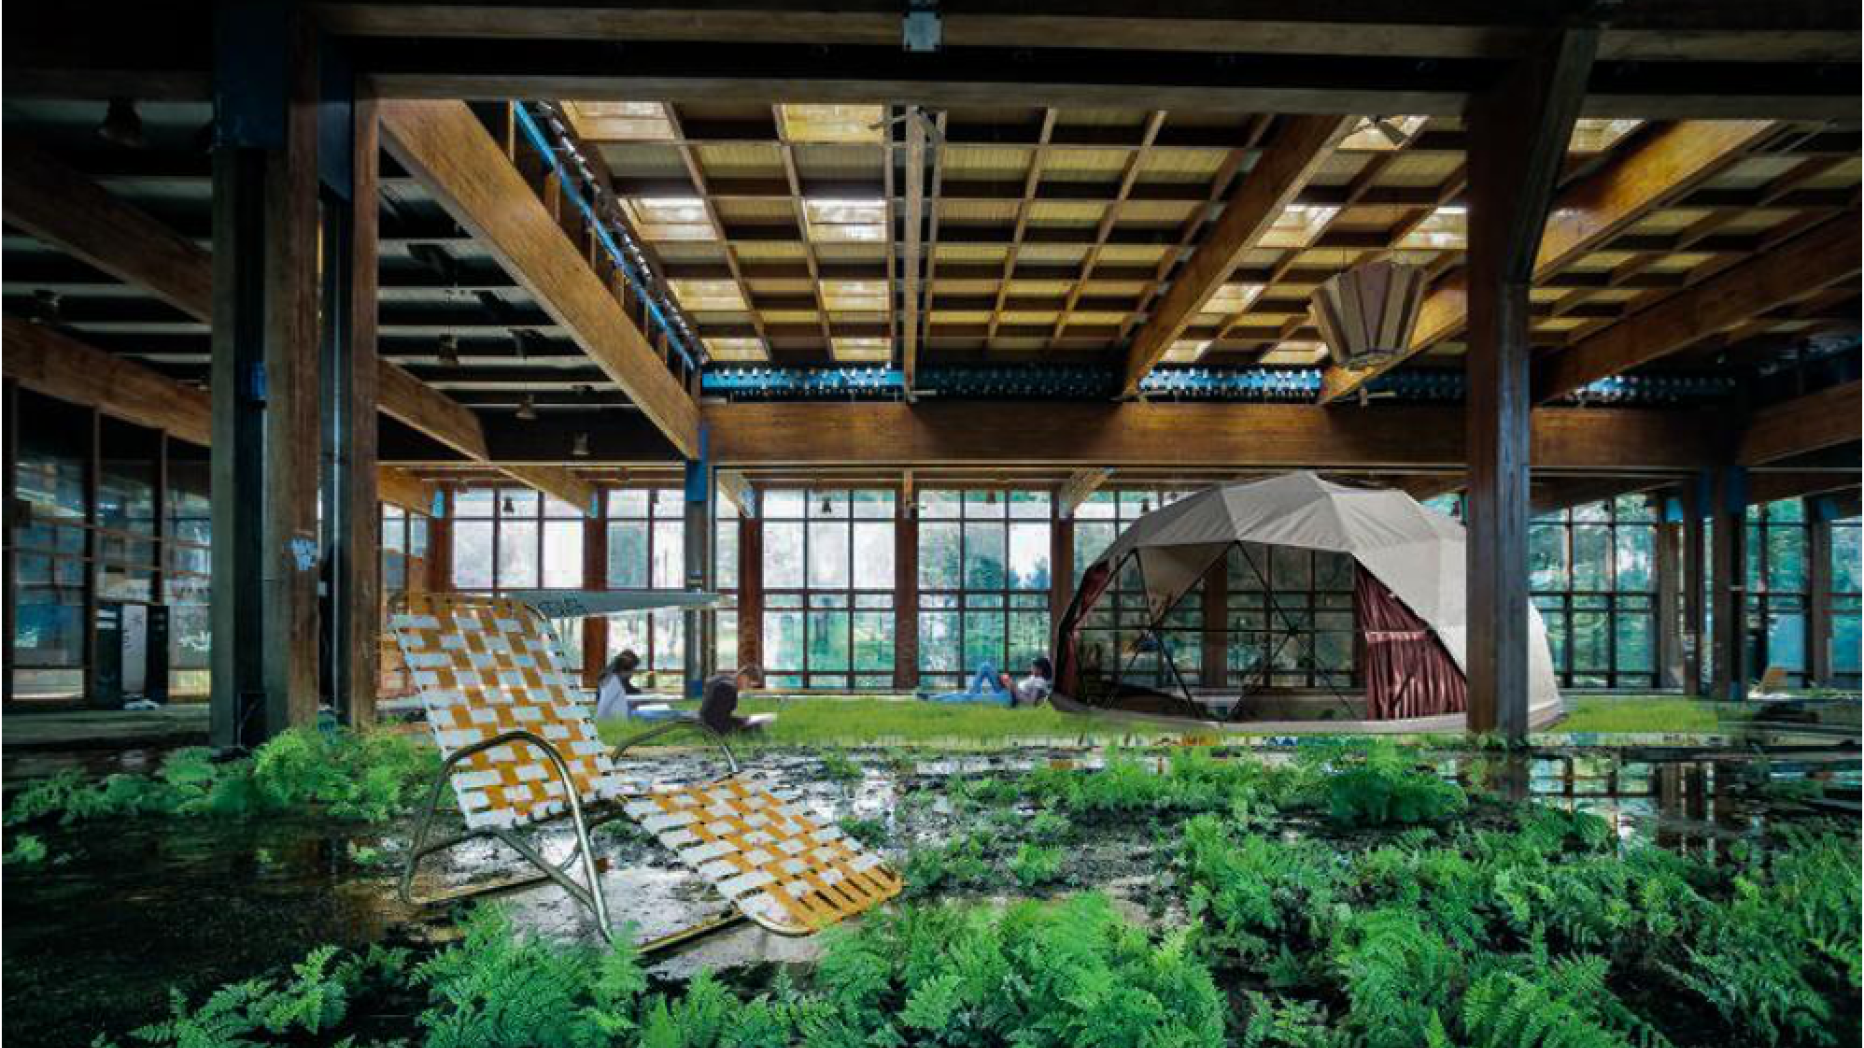 Lawn chair in foreground surrounded by lush greenery in an indoor warehouse with tent in background